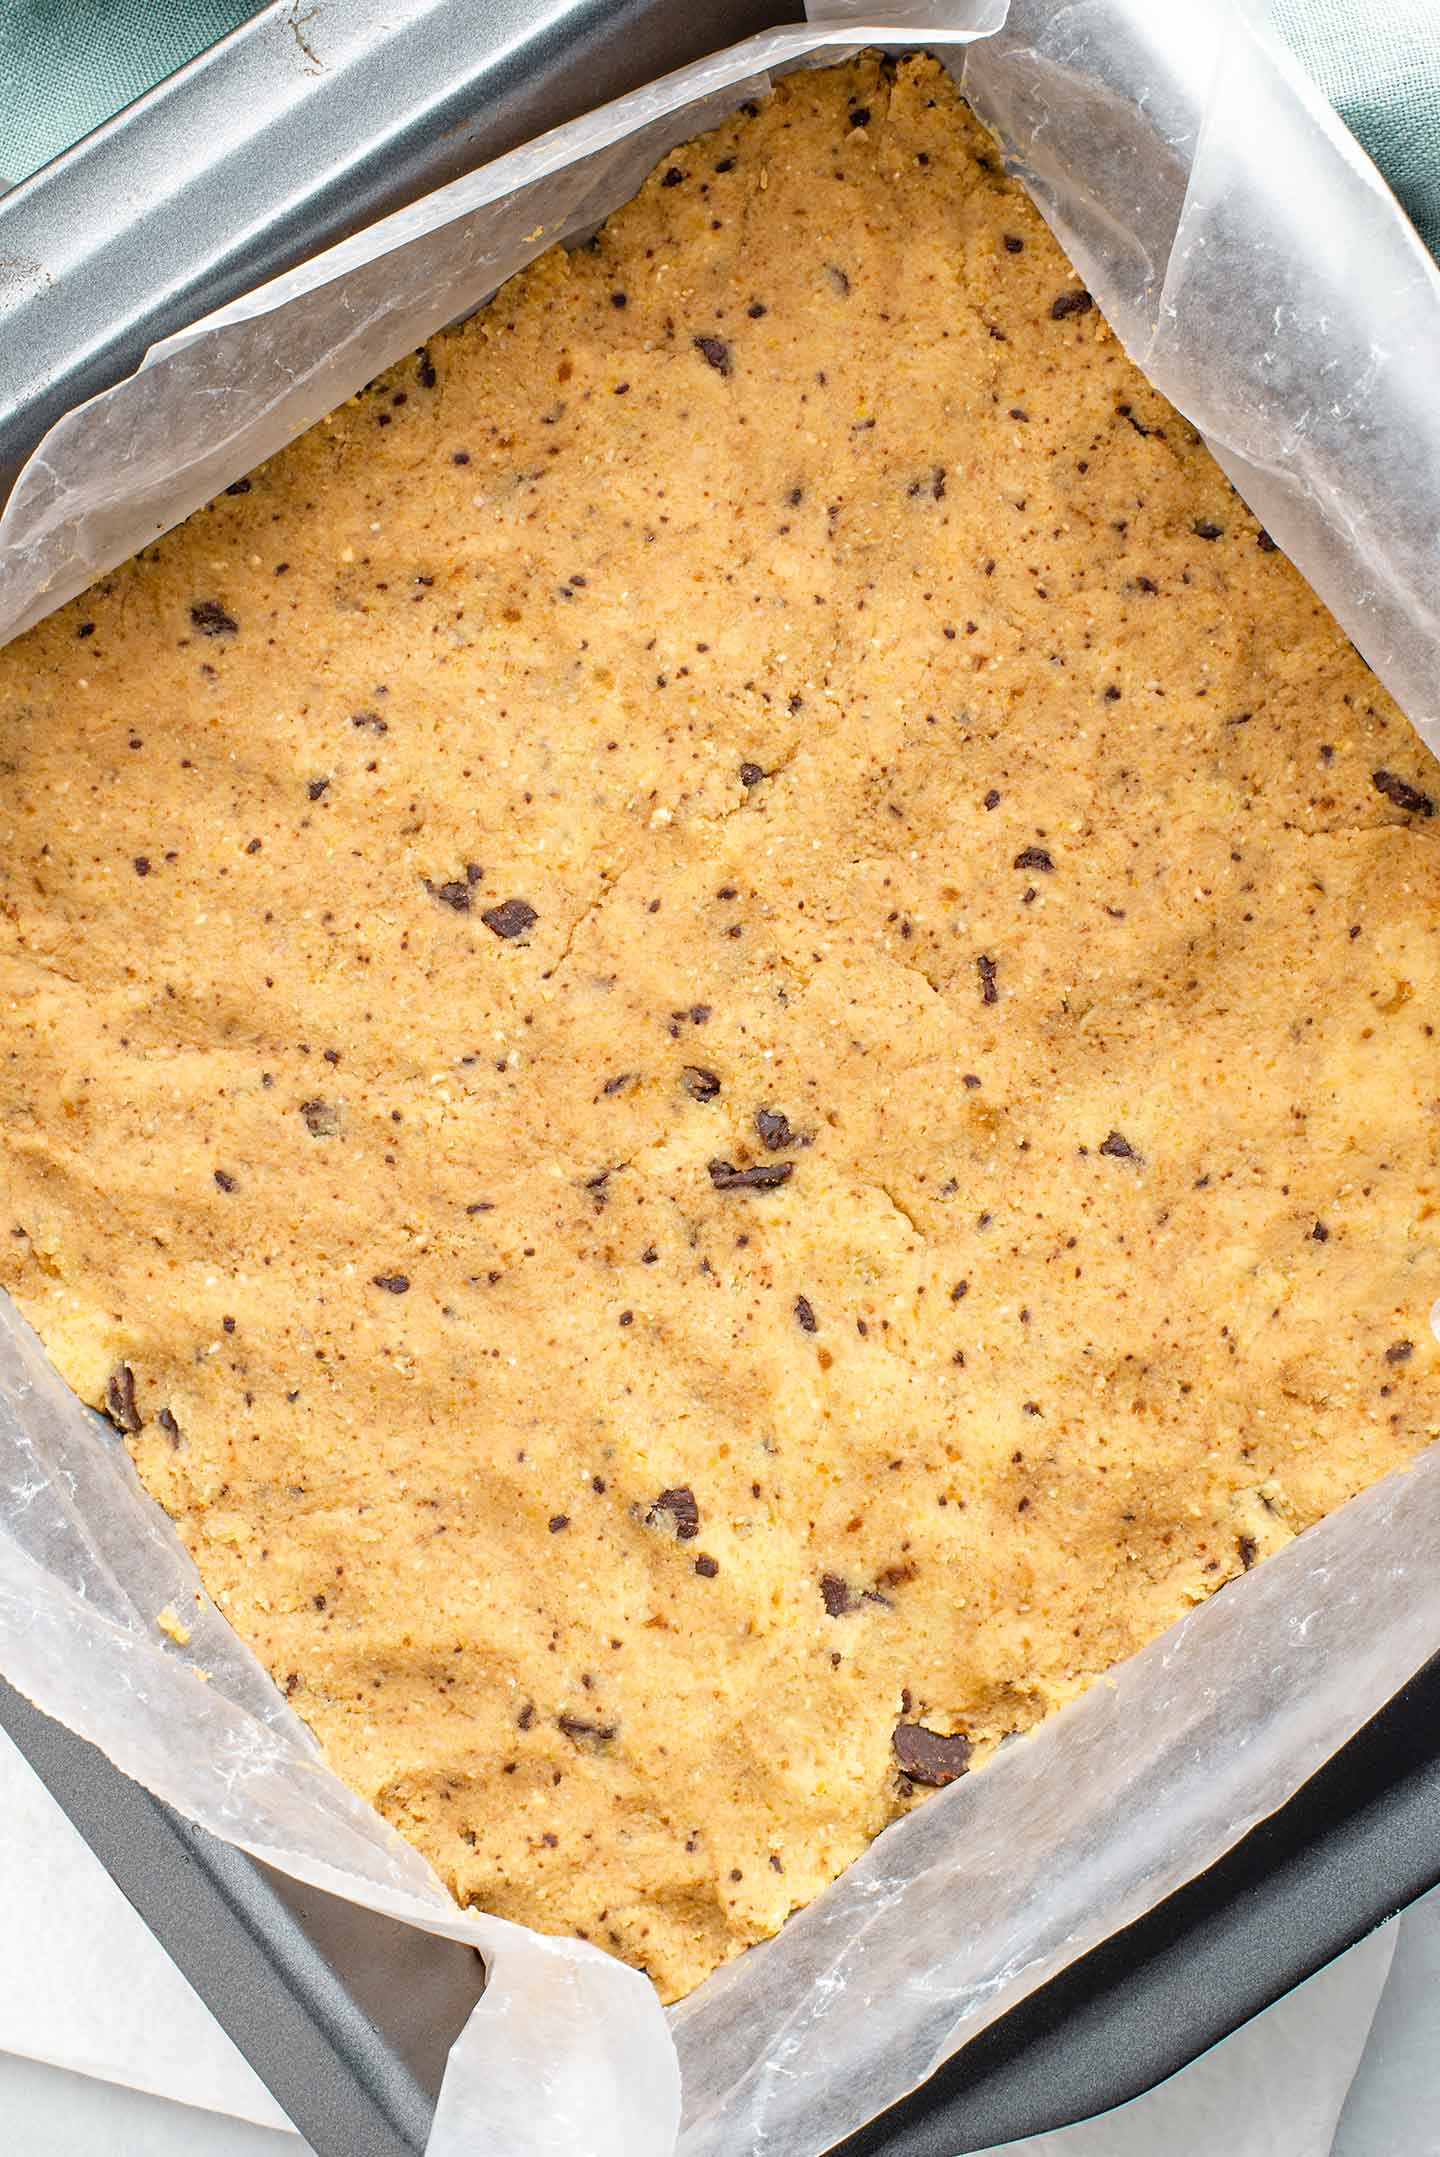 Top down view of the cookie dough base pressed into a baking tin lined with wax paper.